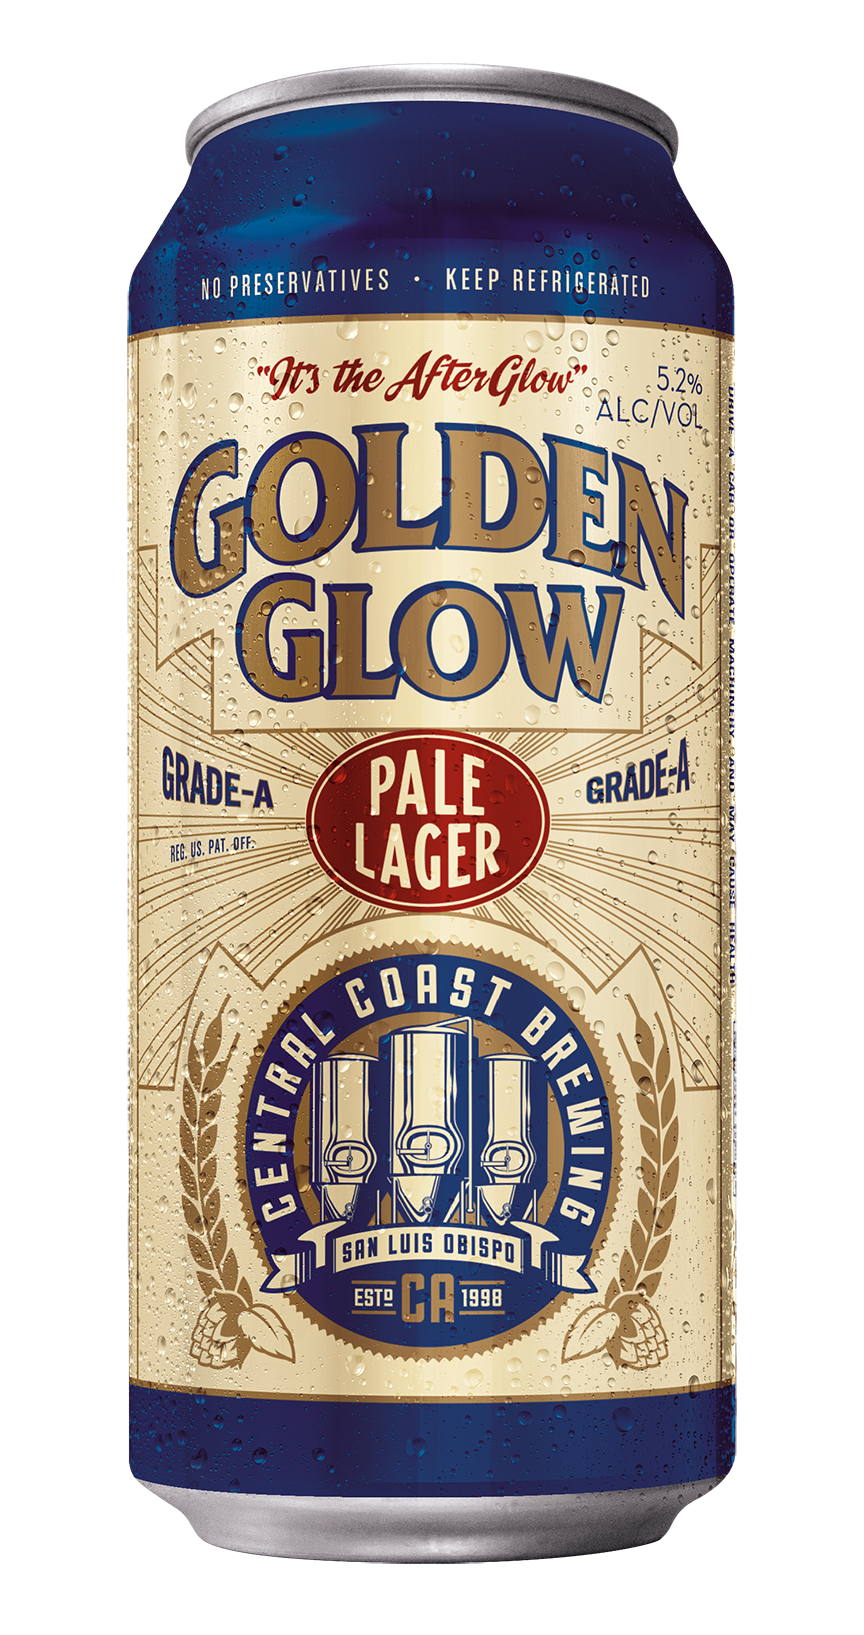 Golden Glow 4-Pack Can (16 oz can)